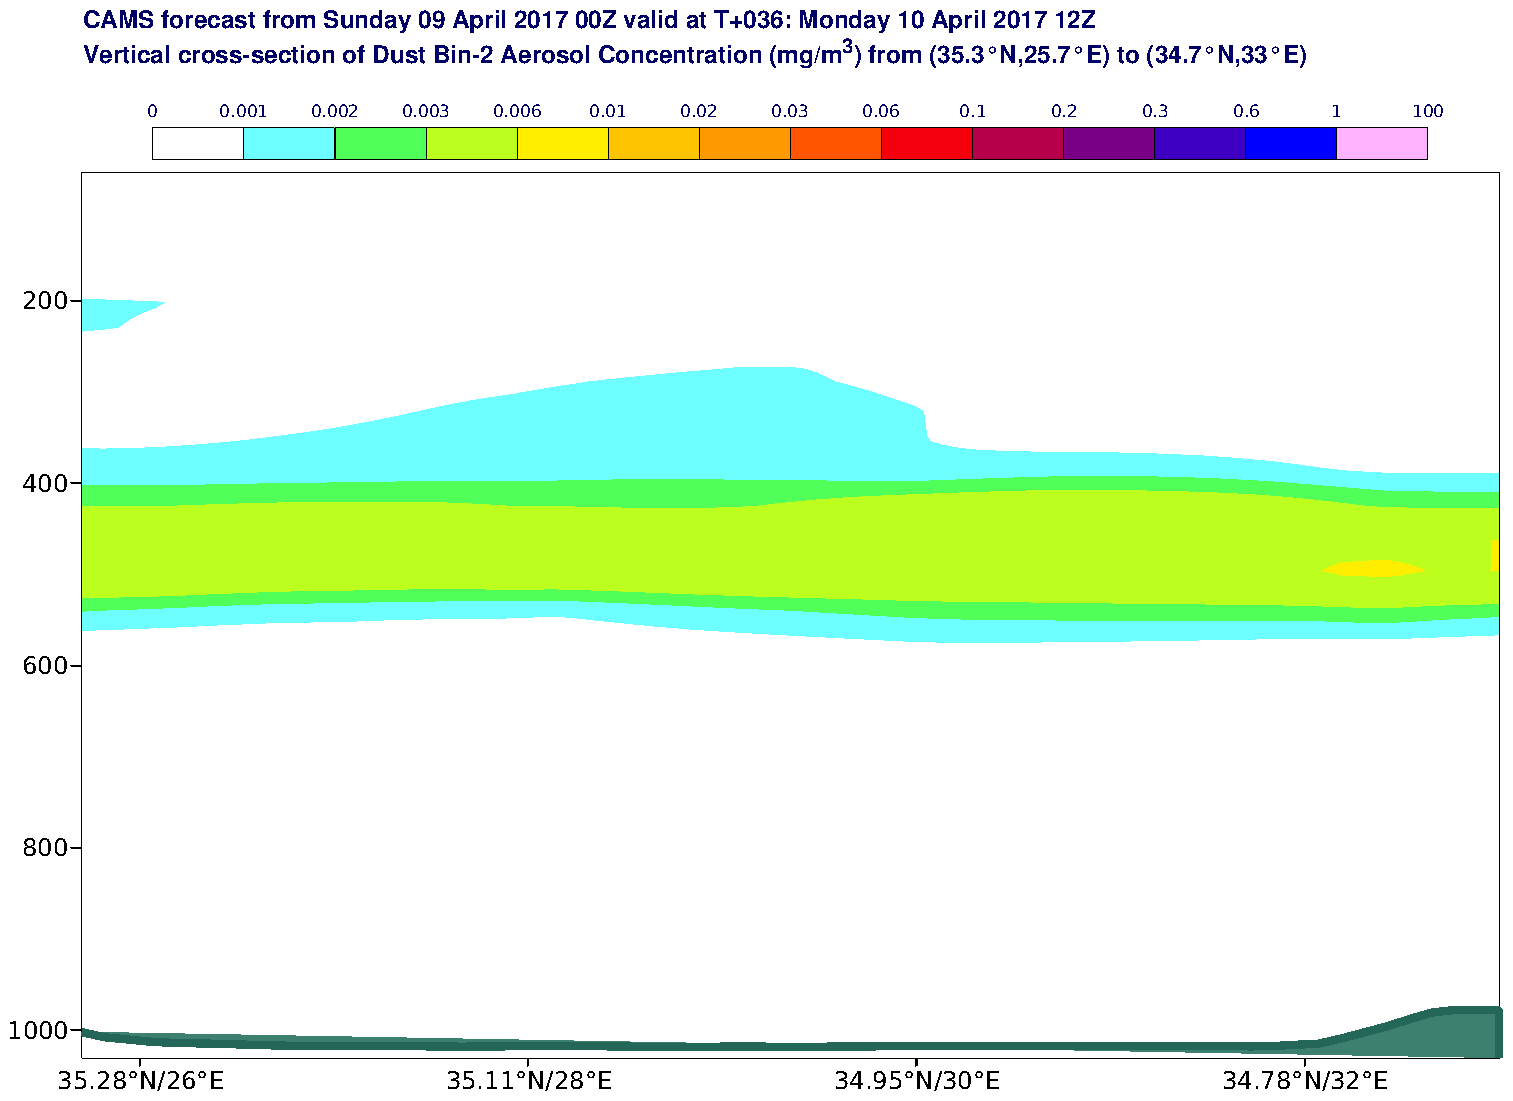 Vertical cross-section of Dust Bin-2 Aerosol Concentration (mg/m3) valid at T36 - 2017-04-10 12:00